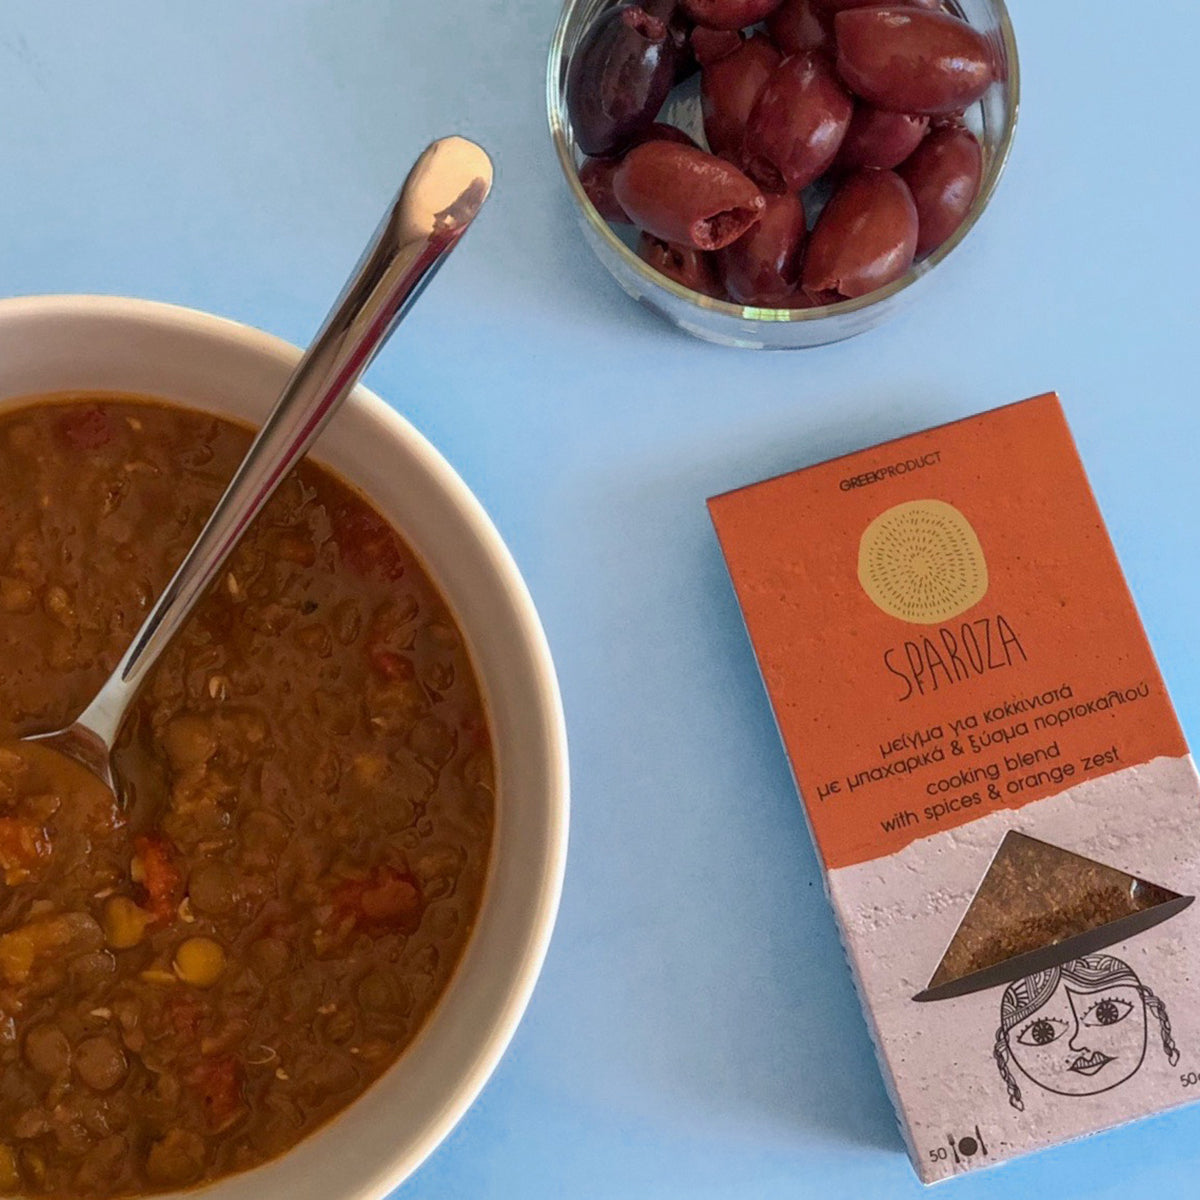 Bowl of lentil soup with olives and Sparoza's cooking blend with spices and orange zest